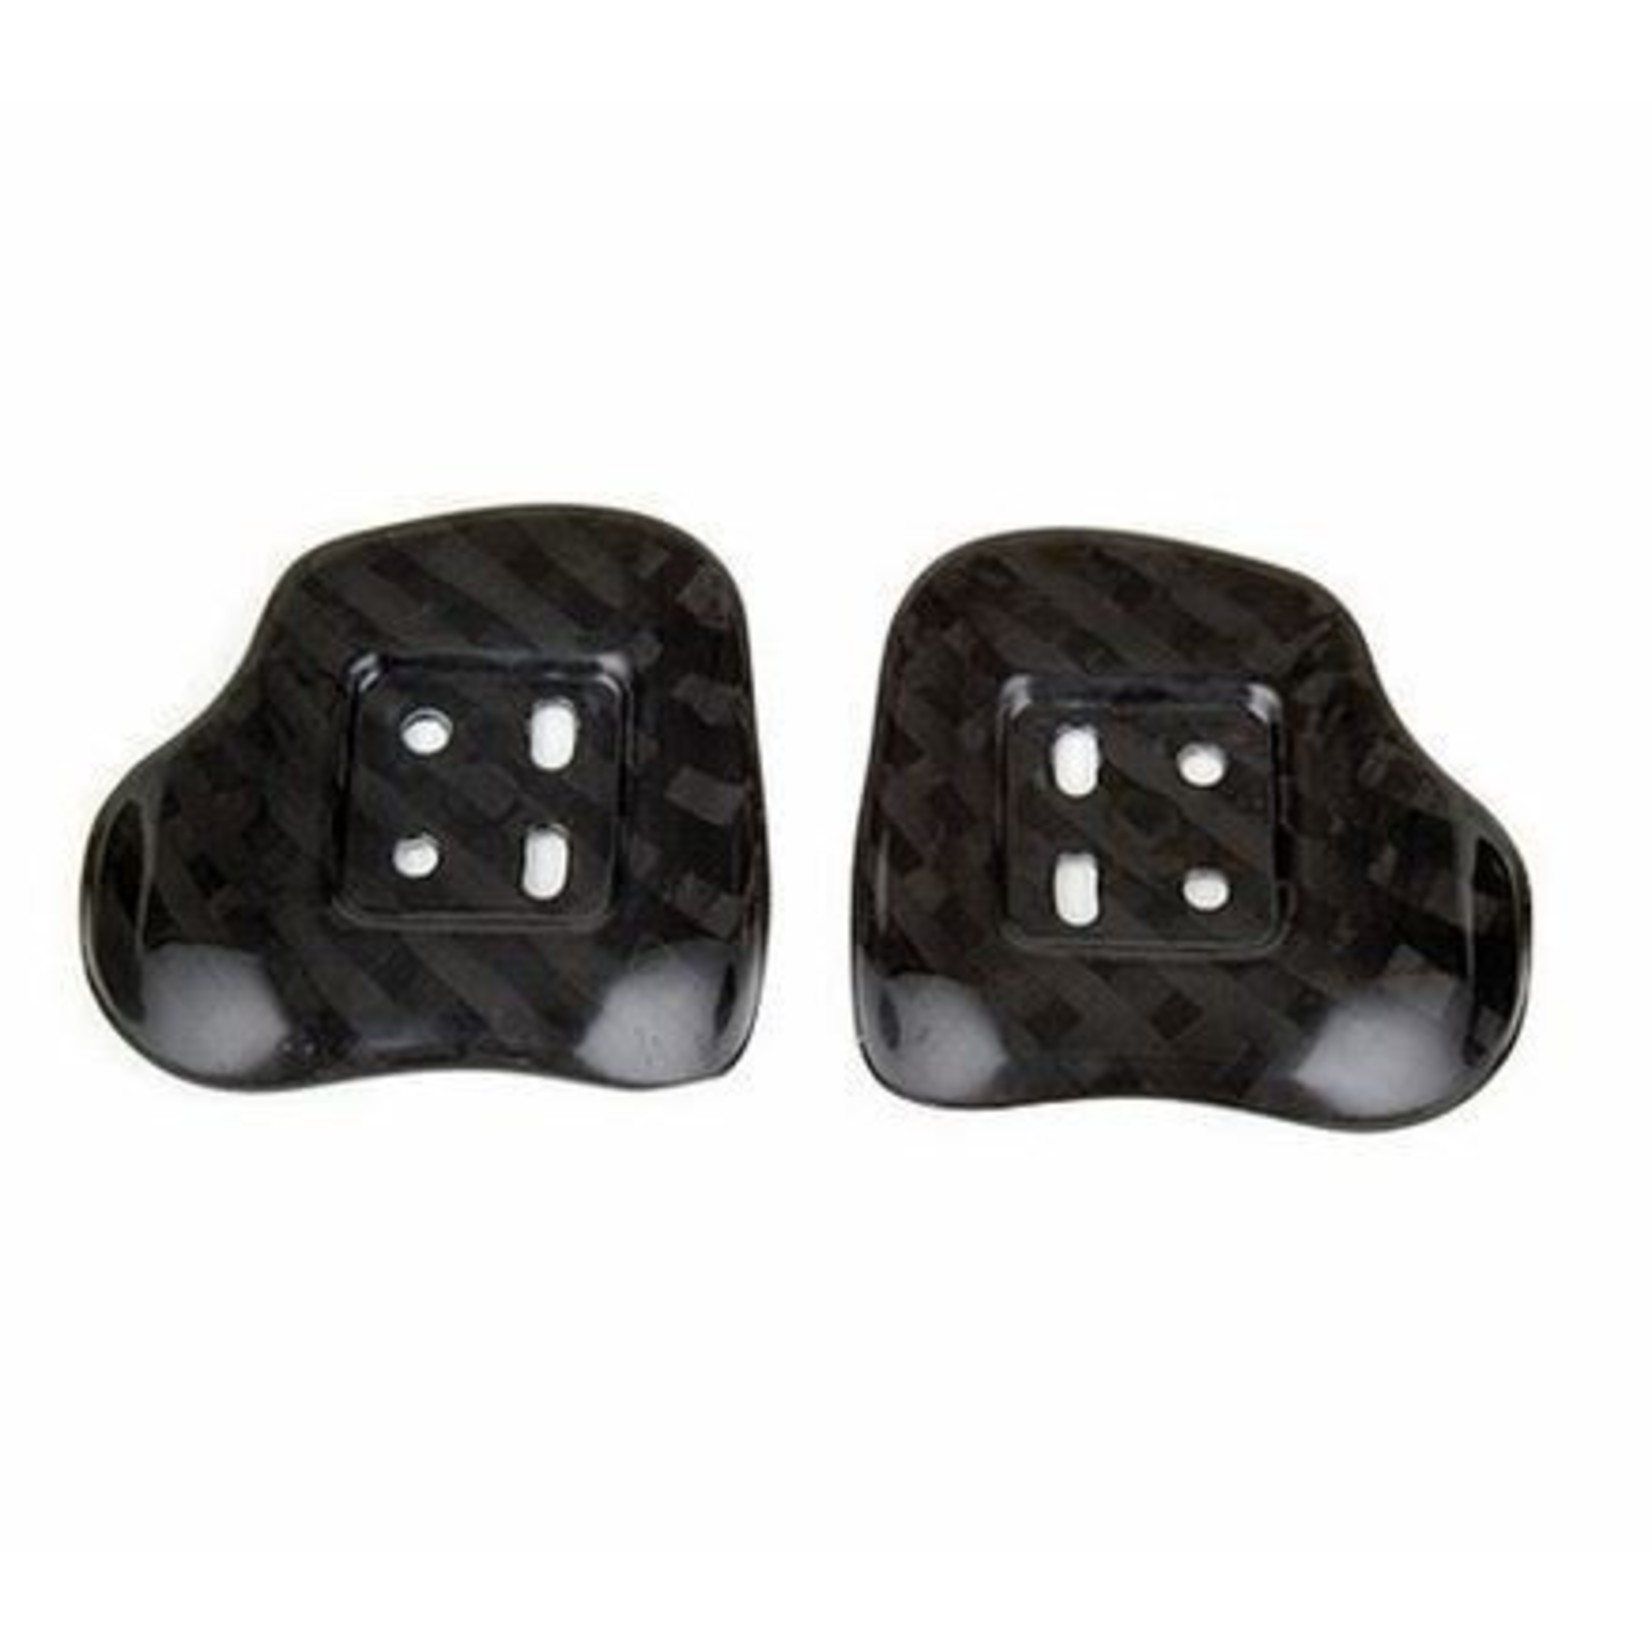 Profile Profile Design F-25 Armrest Kit - Carbon Include Pads And Mounting Hardware